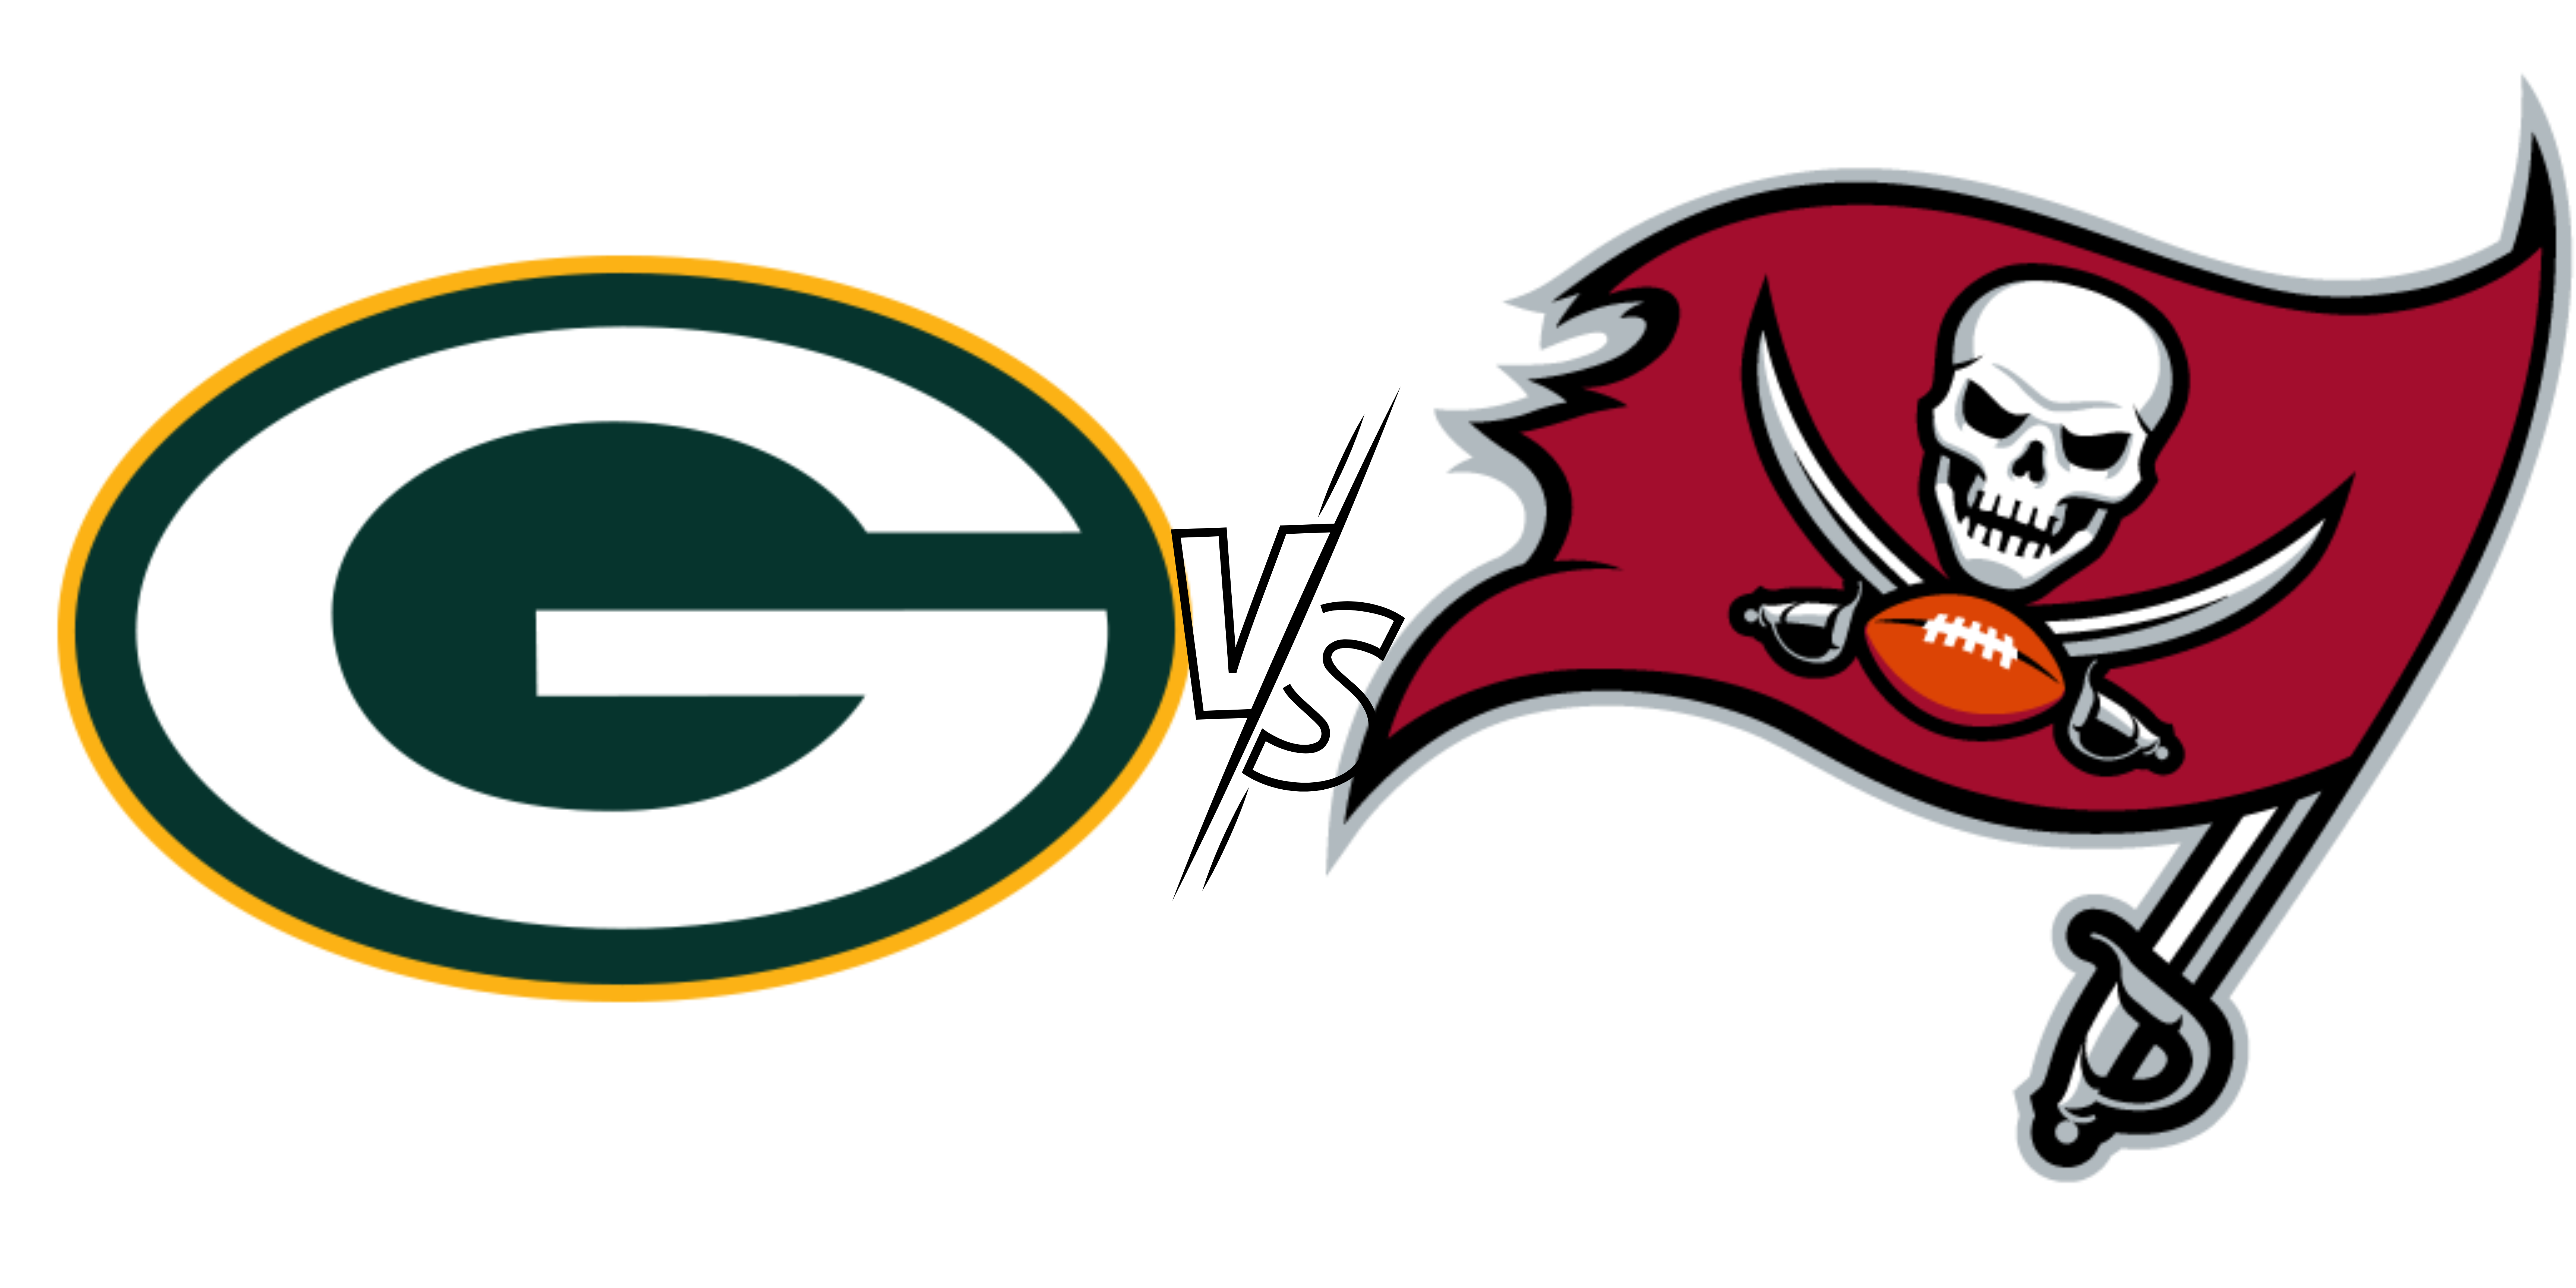 Packer’s records win over Buccaneers with a hard-fought 14-12 triumph in Raymond James Stadium on Sunday￼